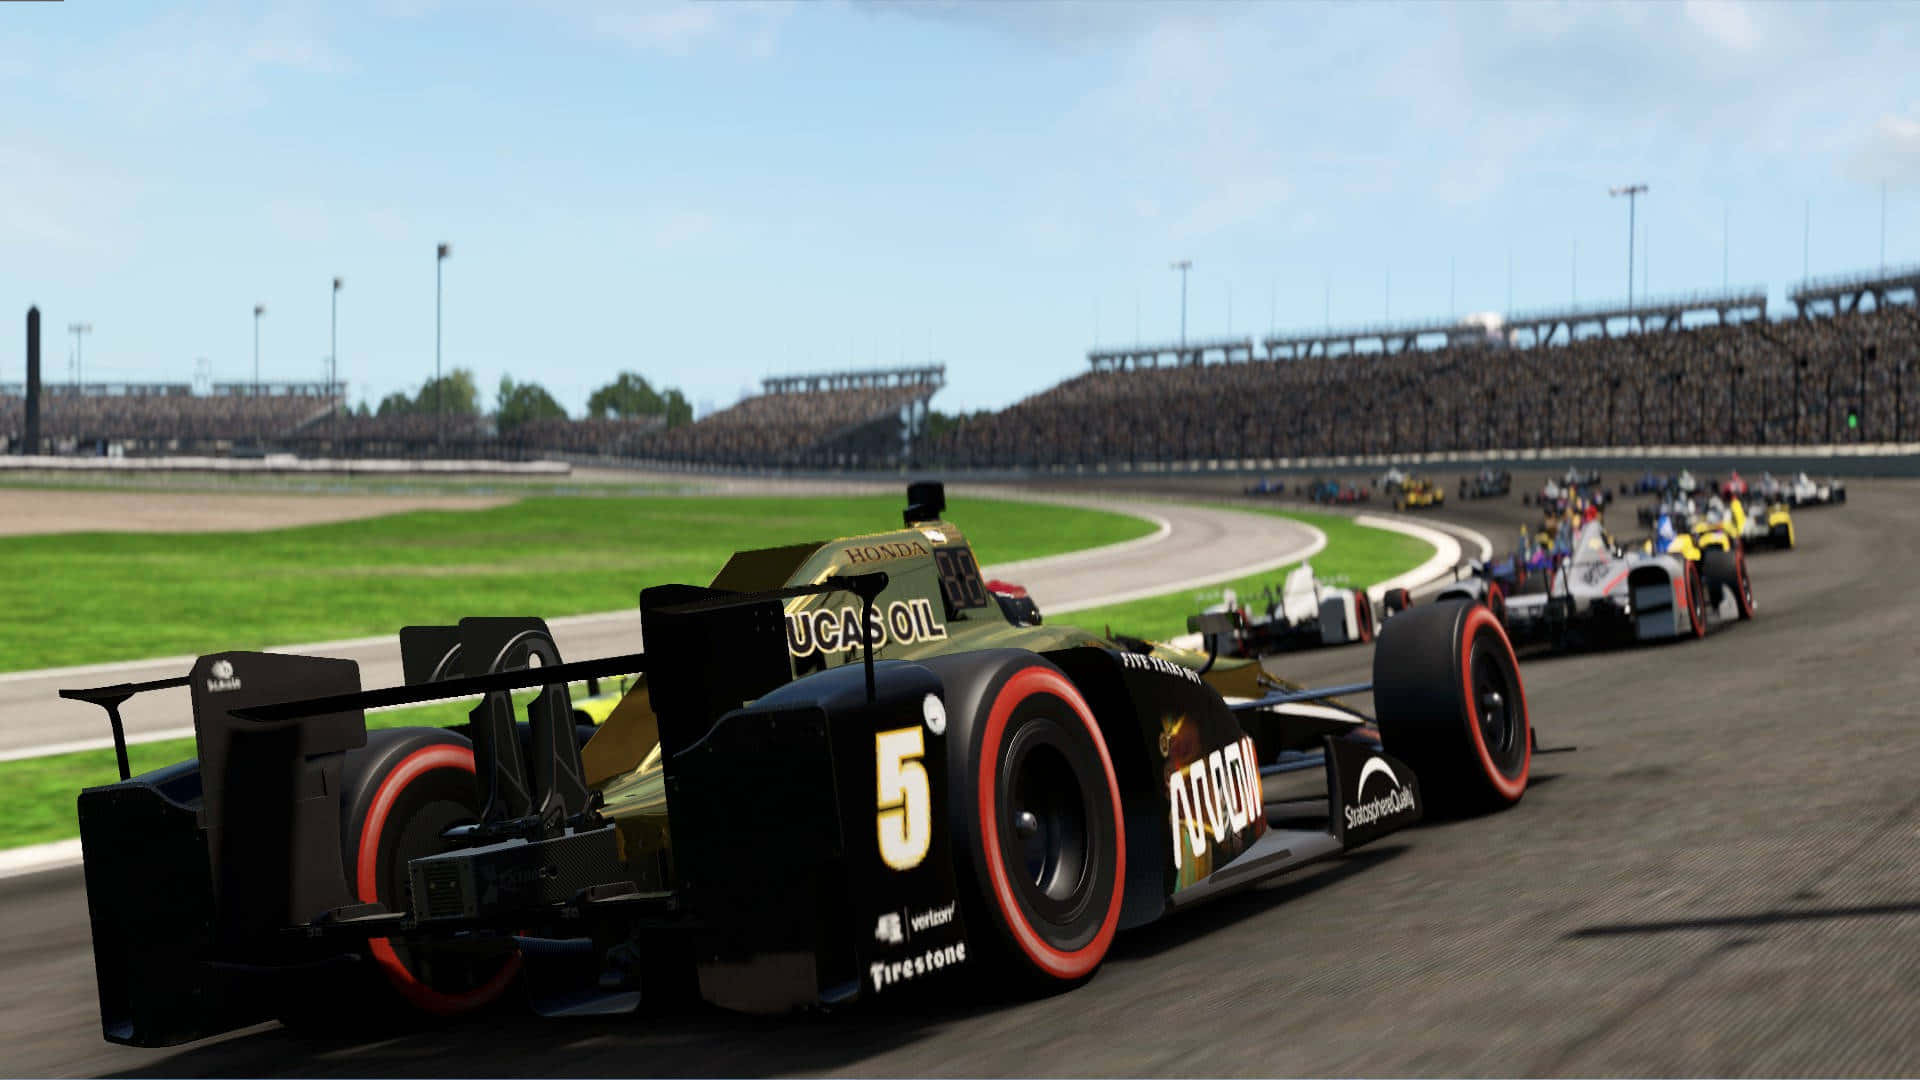 Race to Victory with HD Project Cars 2